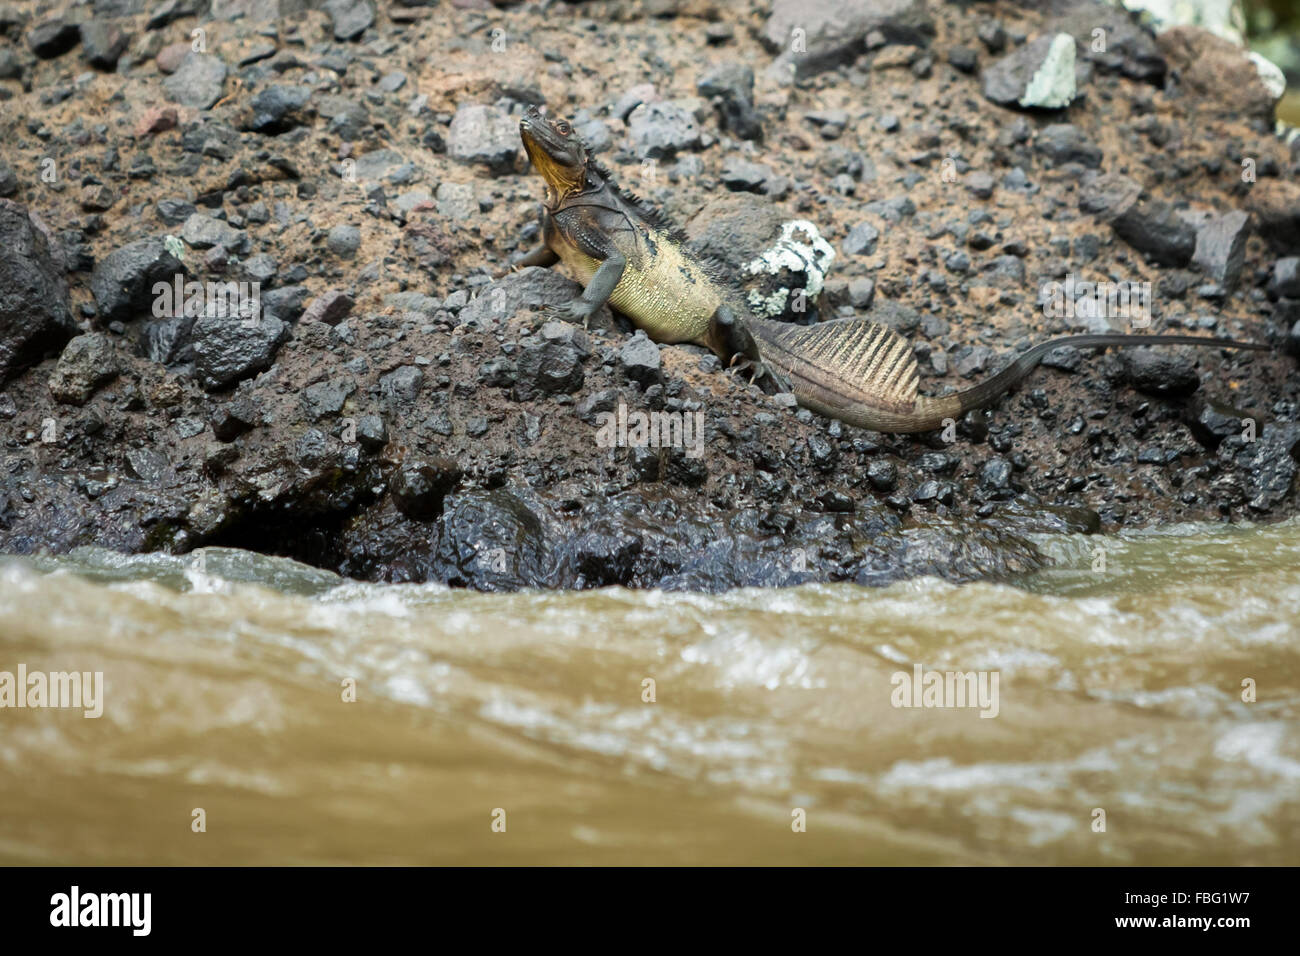 A giant sailfin dragon (probably Hydrosaurus microlophus) lizard is seen on the side of Maiting river in Tana Toraja, South Sulawesi, Indonesia. Stock Photo